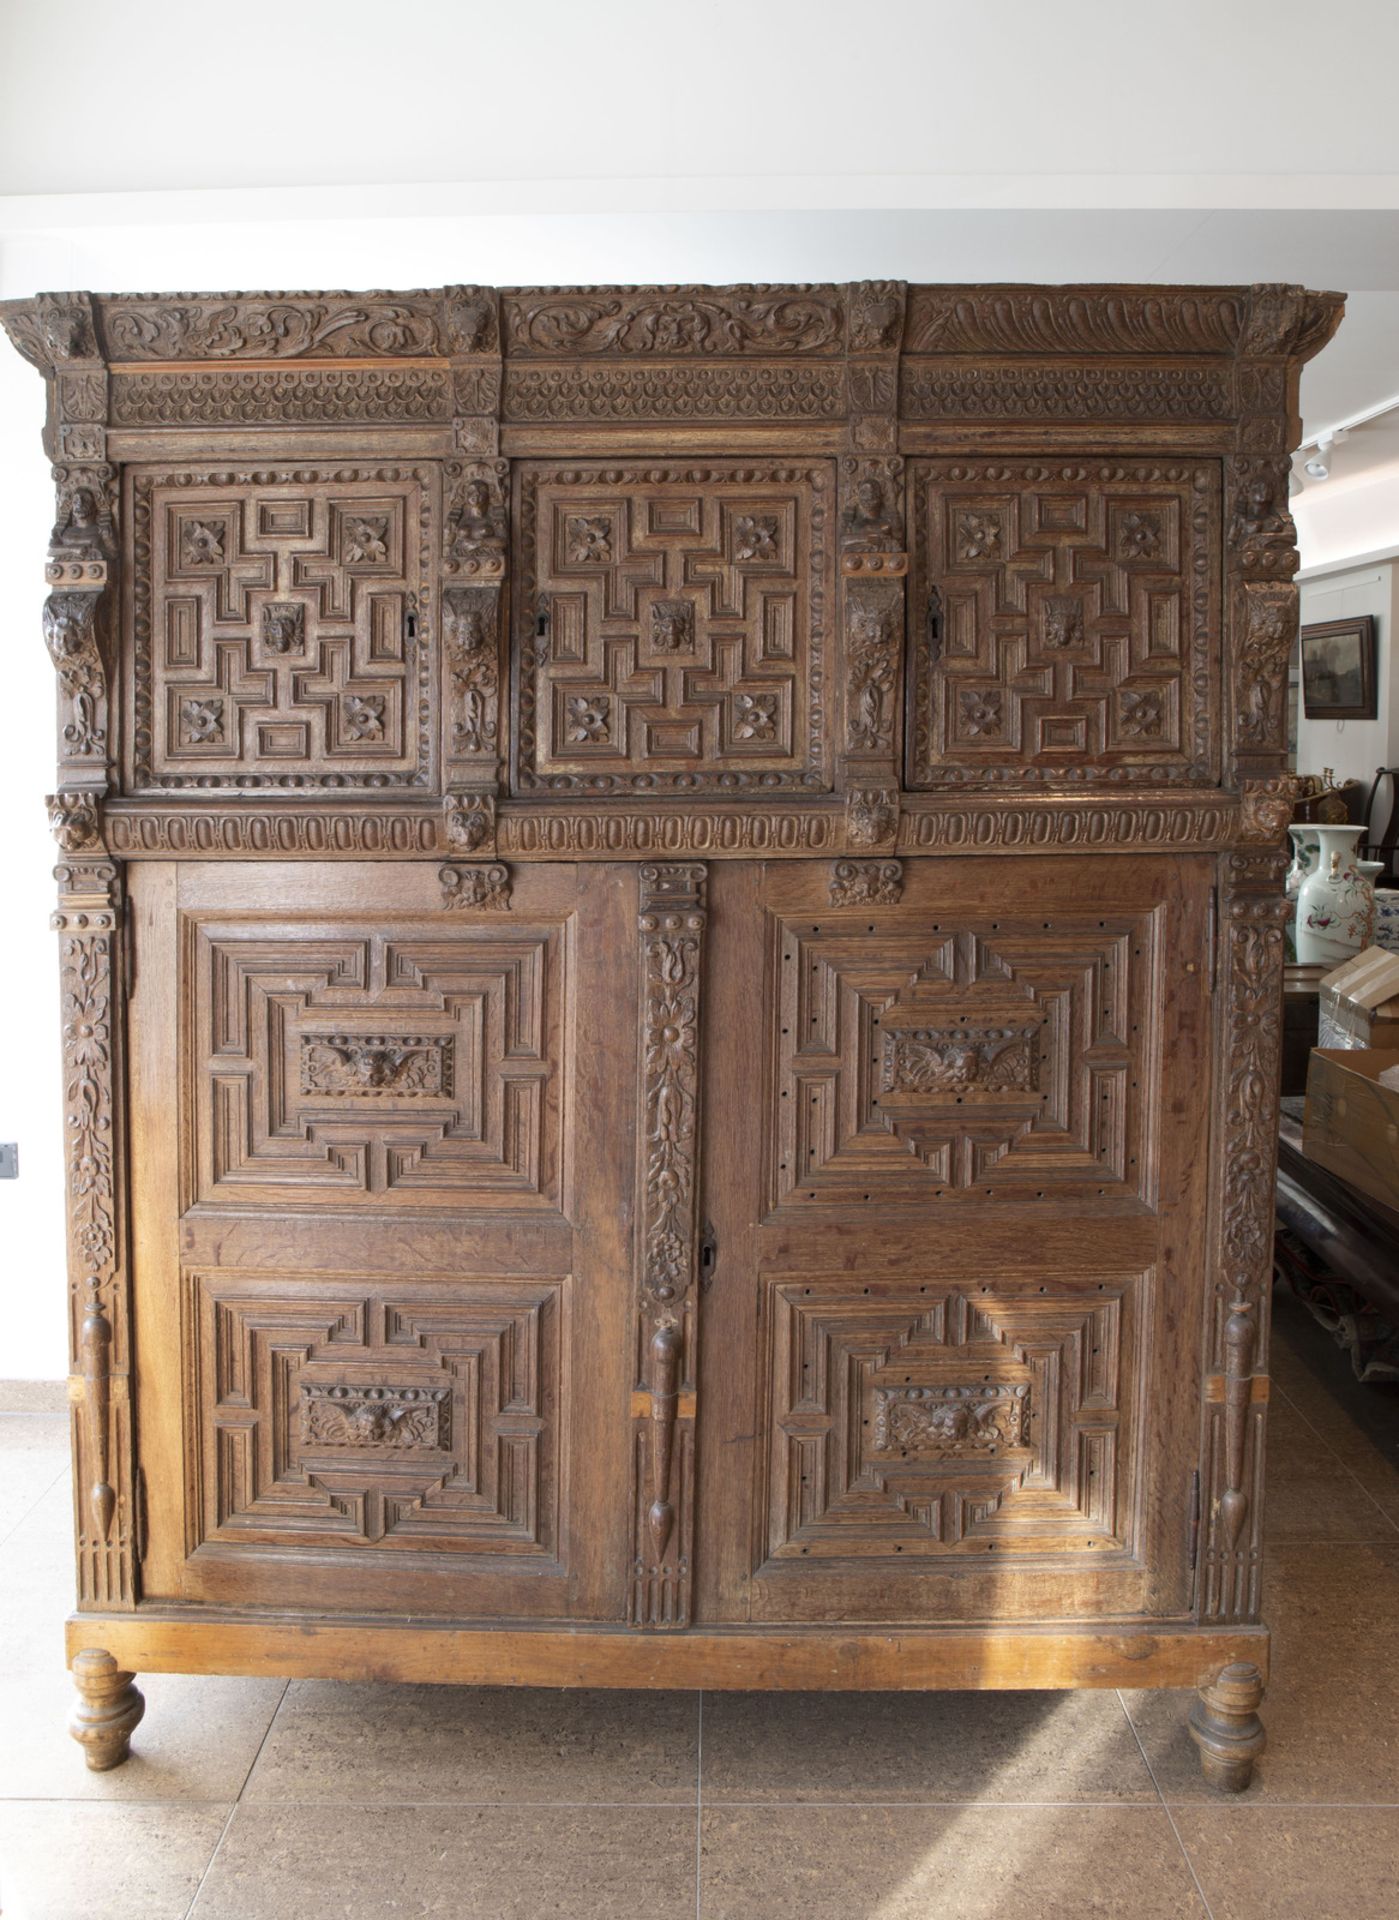 A Flemish wooden Renaissance five-door cupboard with figures, lion heads and floral design, 17th C. - Image 4 of 7